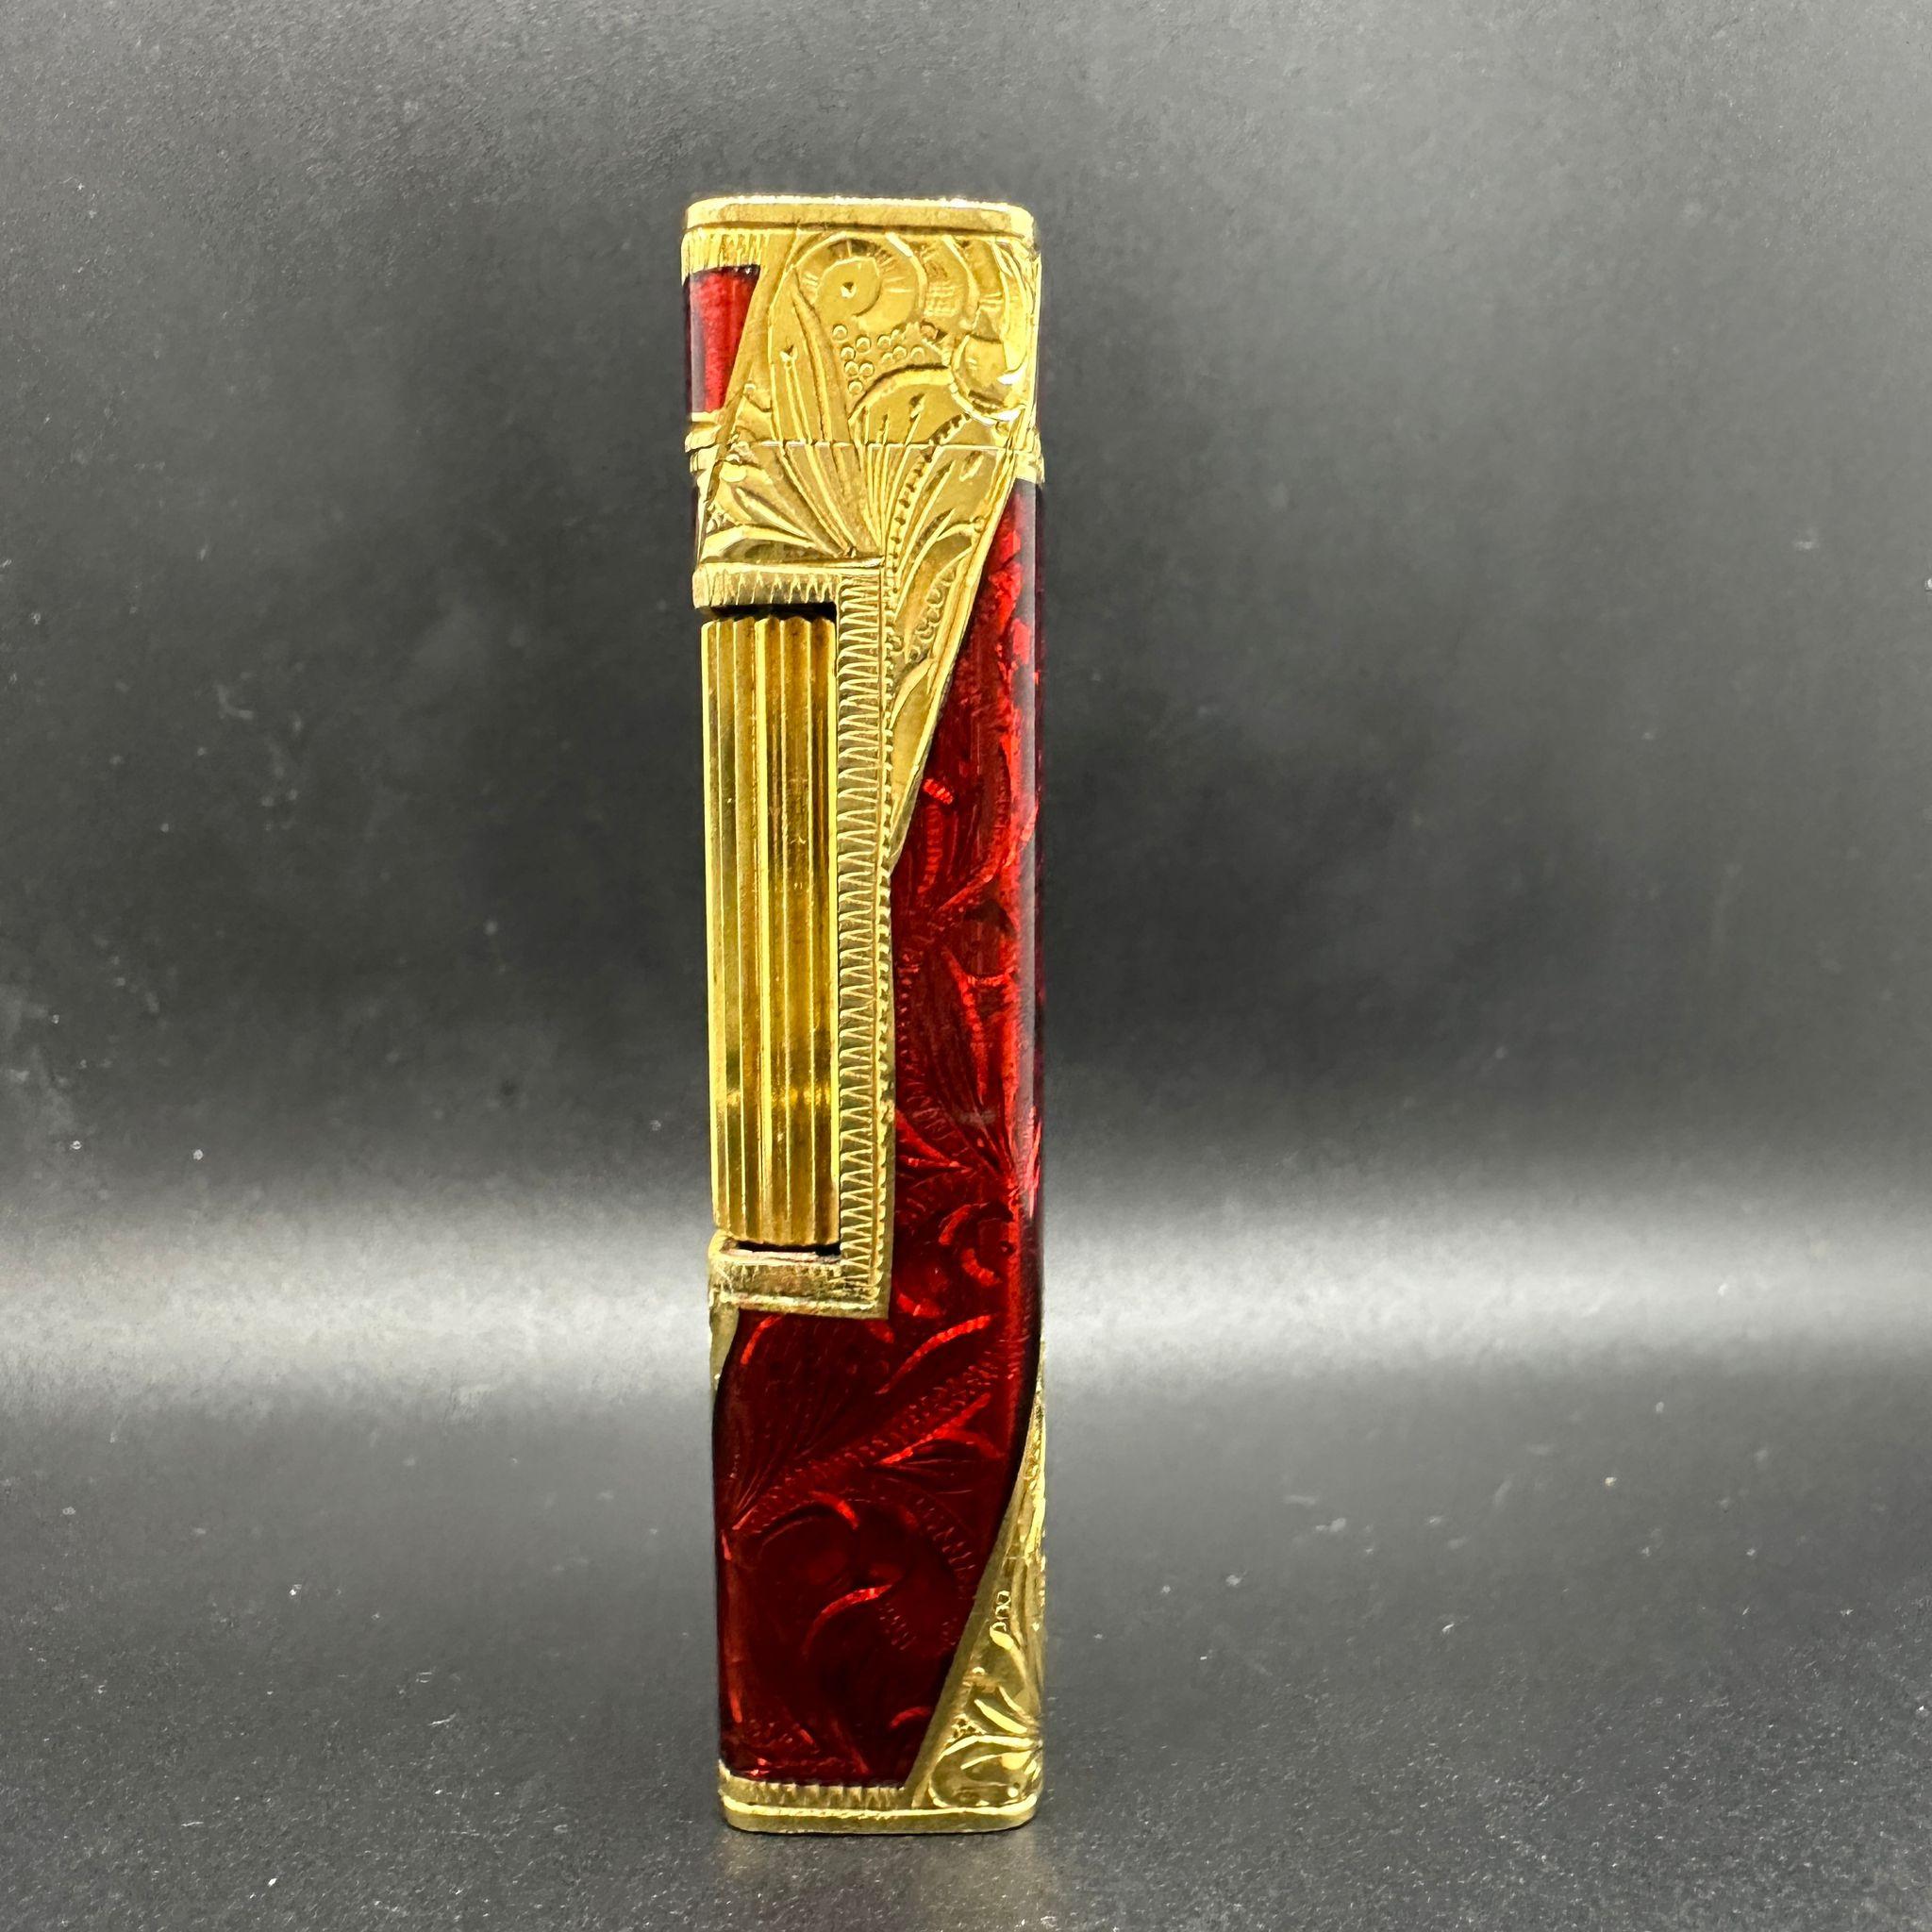 Cartier “Royking” lighter.
Circe 1970
CARTIER  Roy King Rollagas, a Unique RARE example of a ROYKING designed Cartier Rollagas lighter made circa 1970's, 18K Gold Baroque Inlay with Red lacquer, mint condition.
Roy King emblem on top side part of